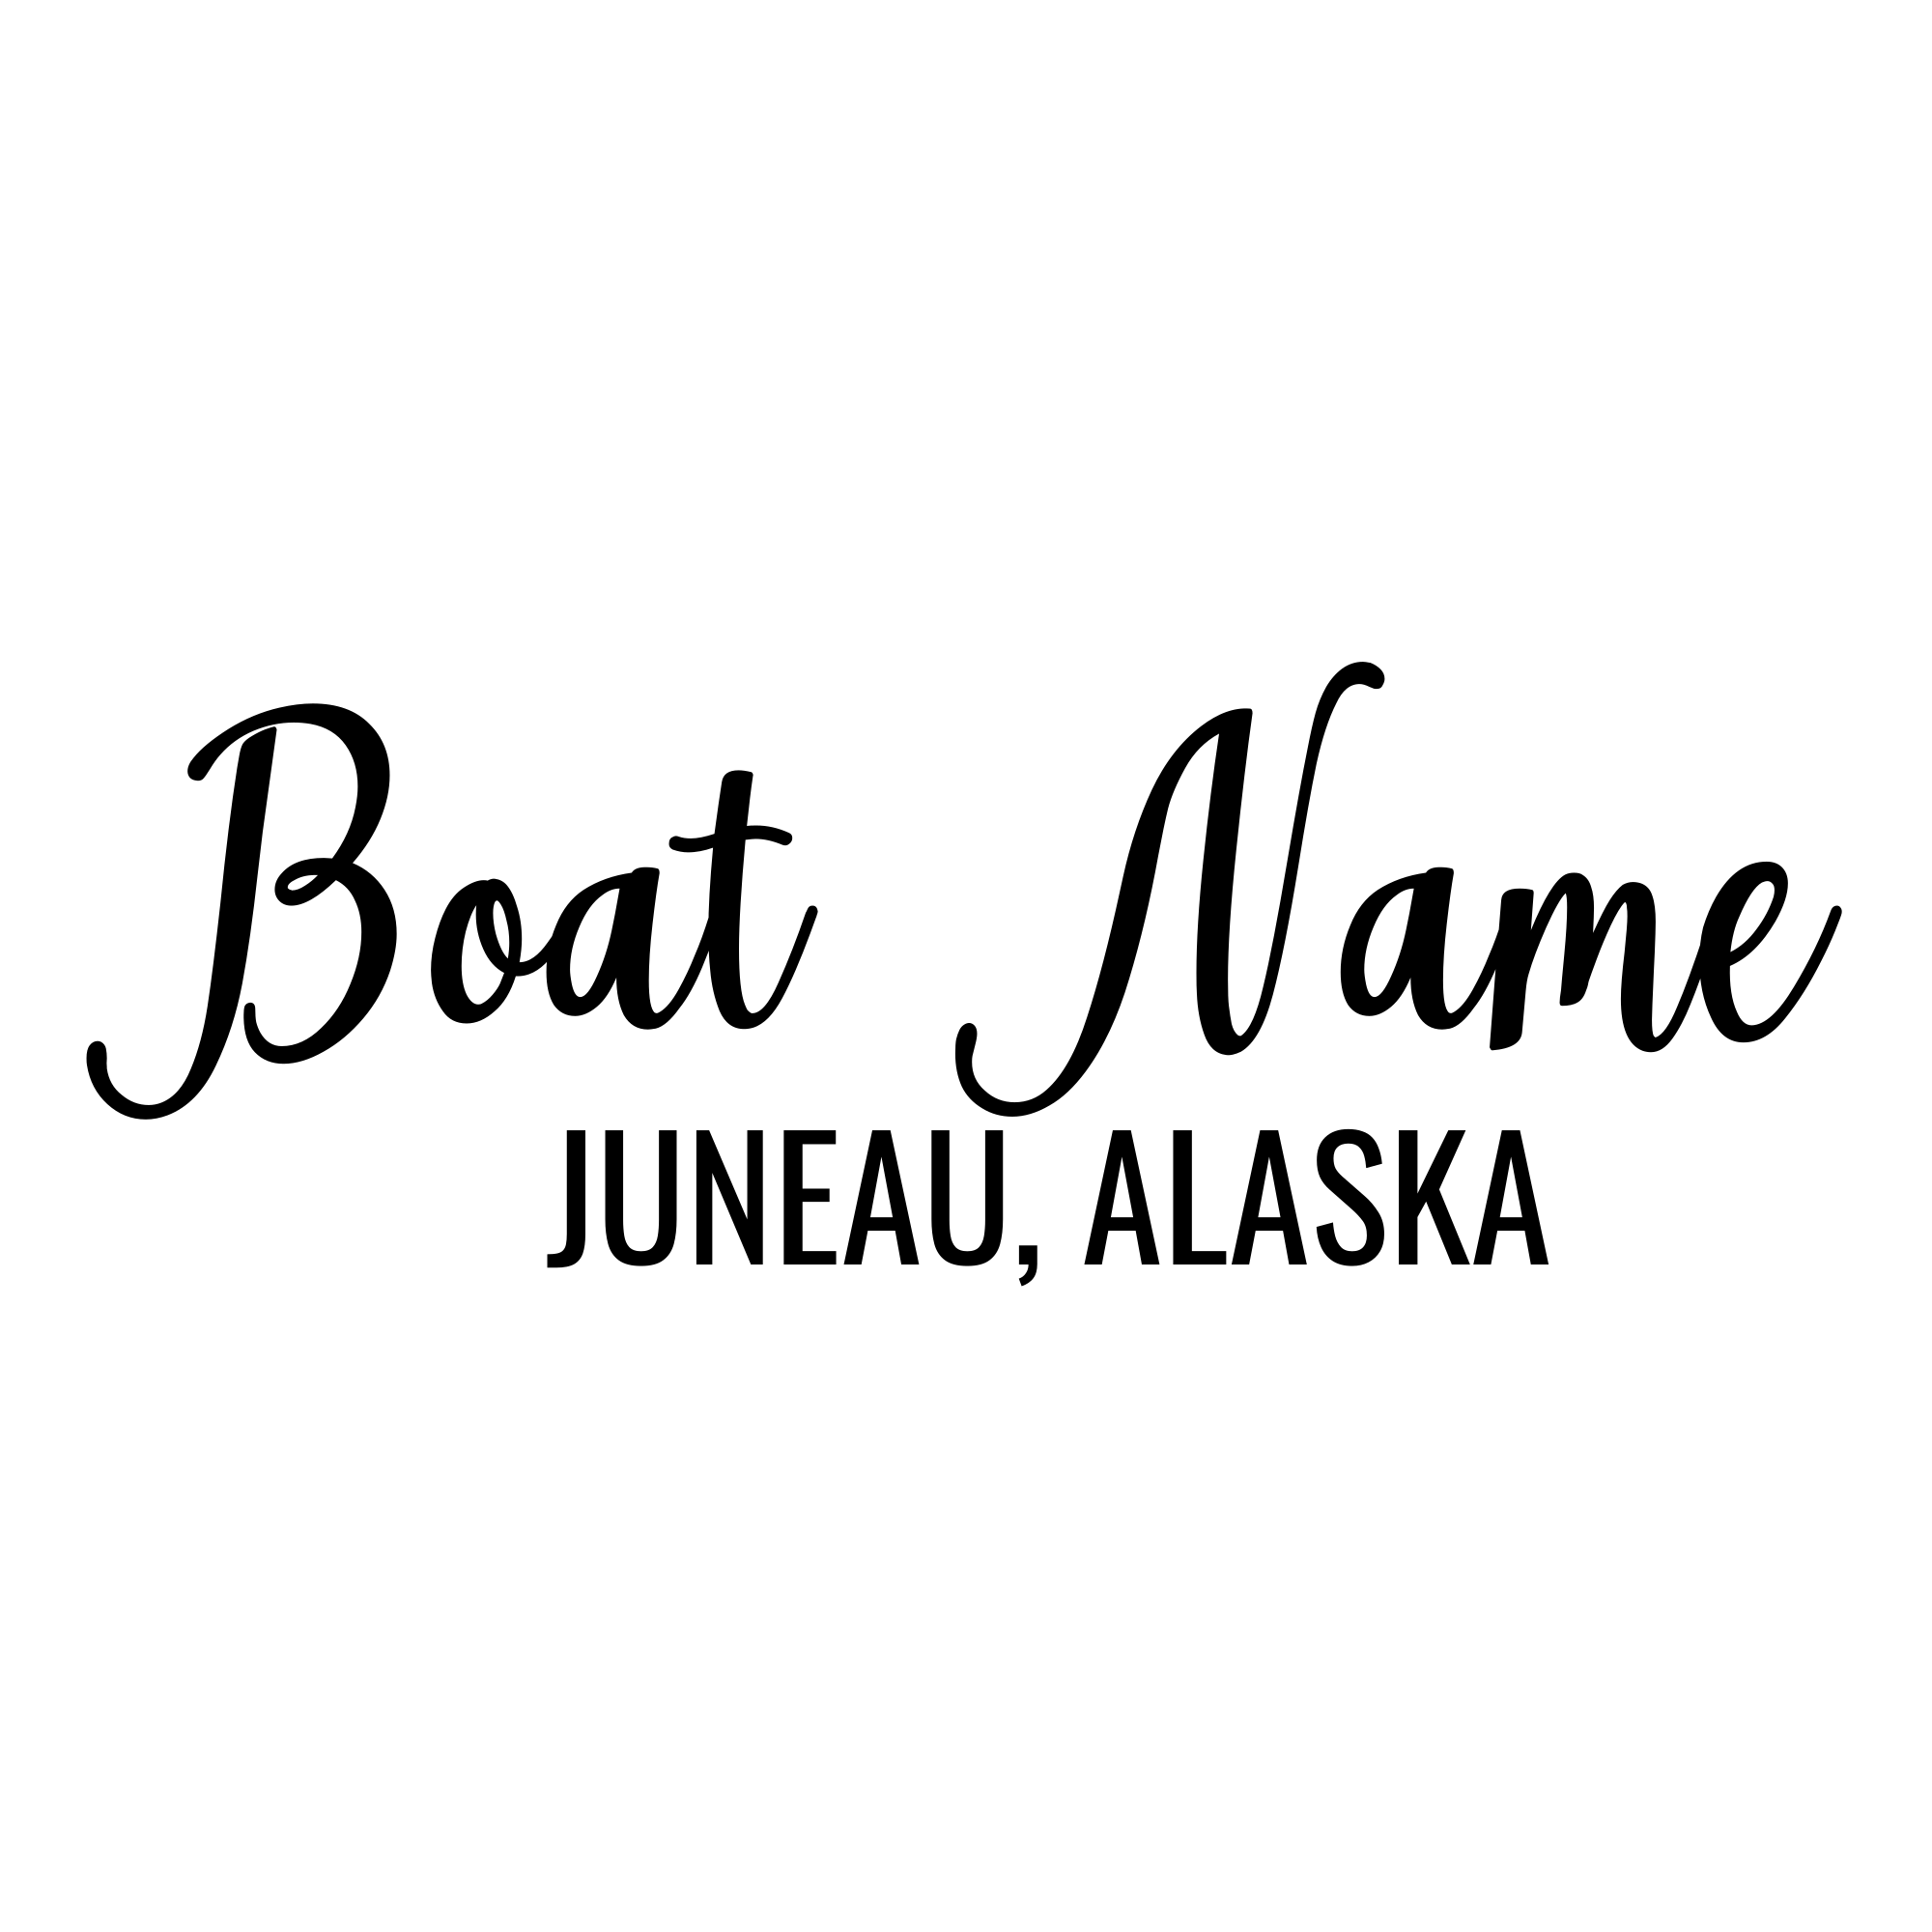 Personalized Boat Name Vinyl Decal with Hailing Port State - Permanent Marine-Grade for Signs, Speed boat, Fishing Vessel, Watercraft C14, B1